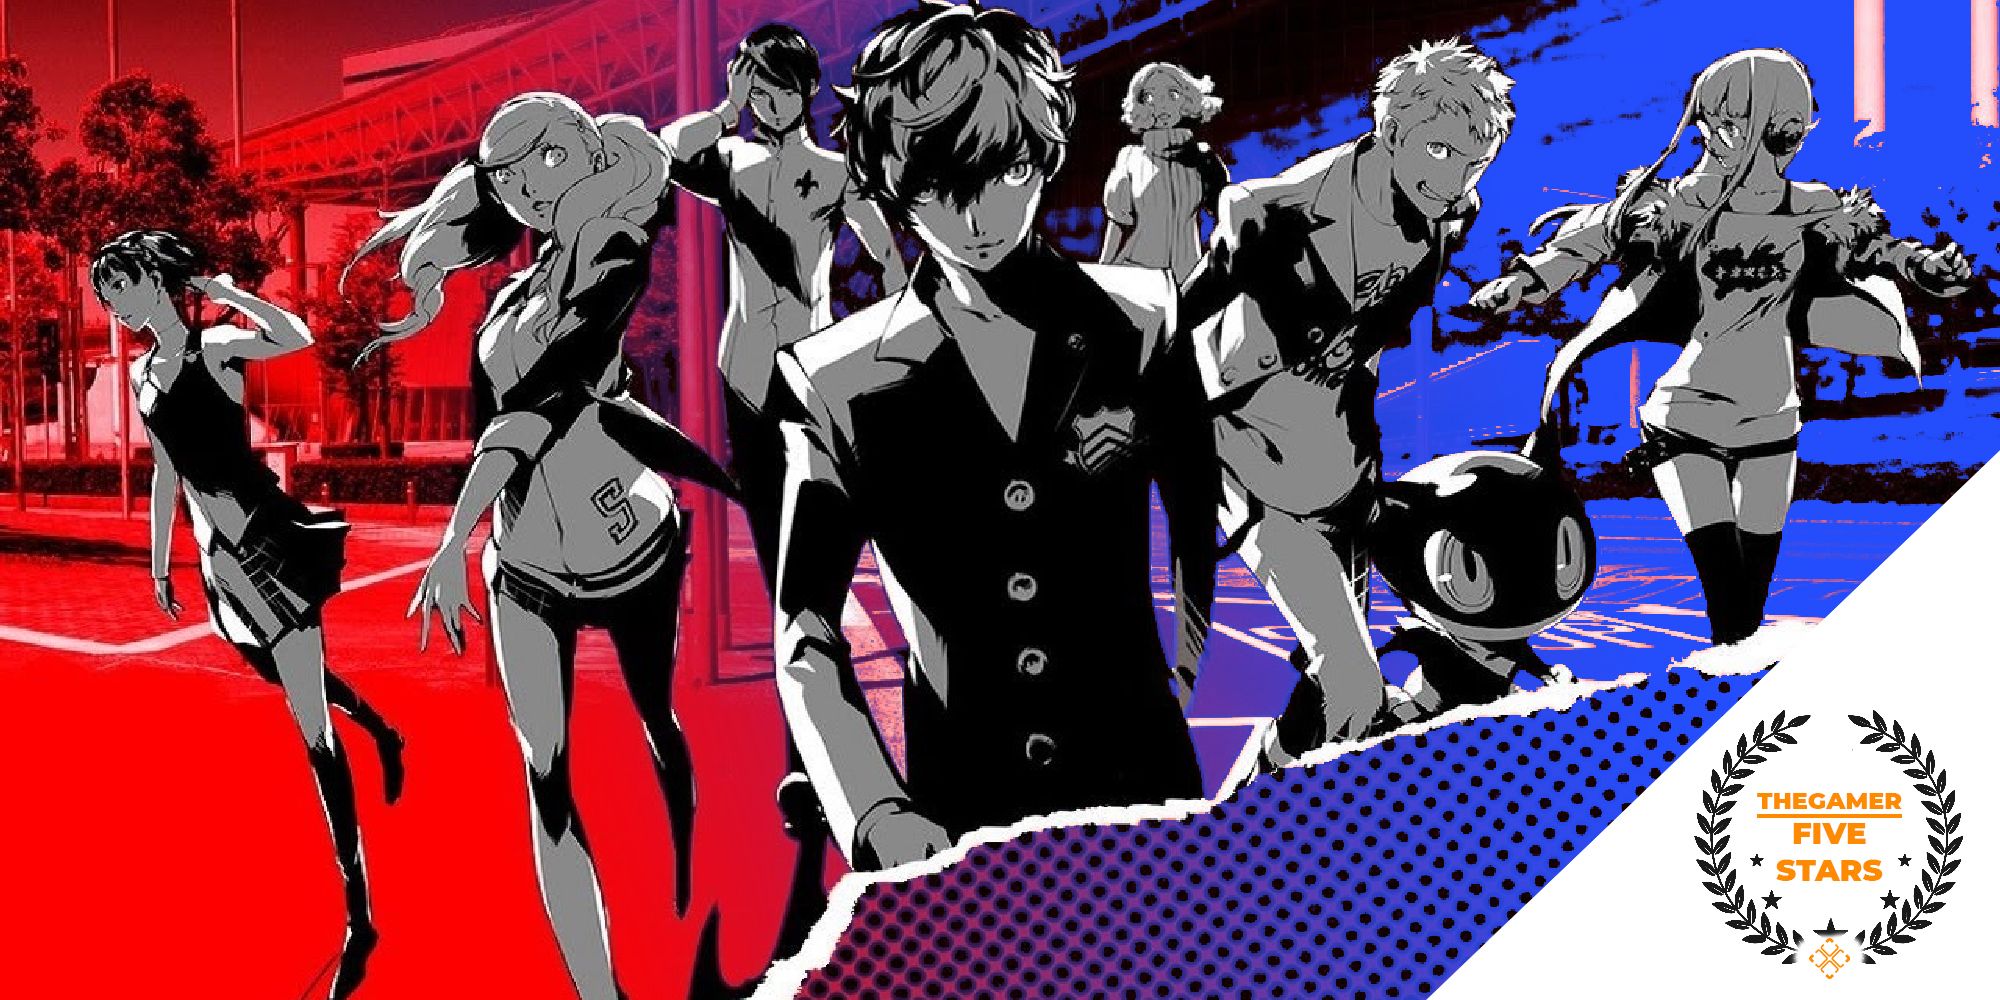 Persona 5 Royal might come to Switch after all